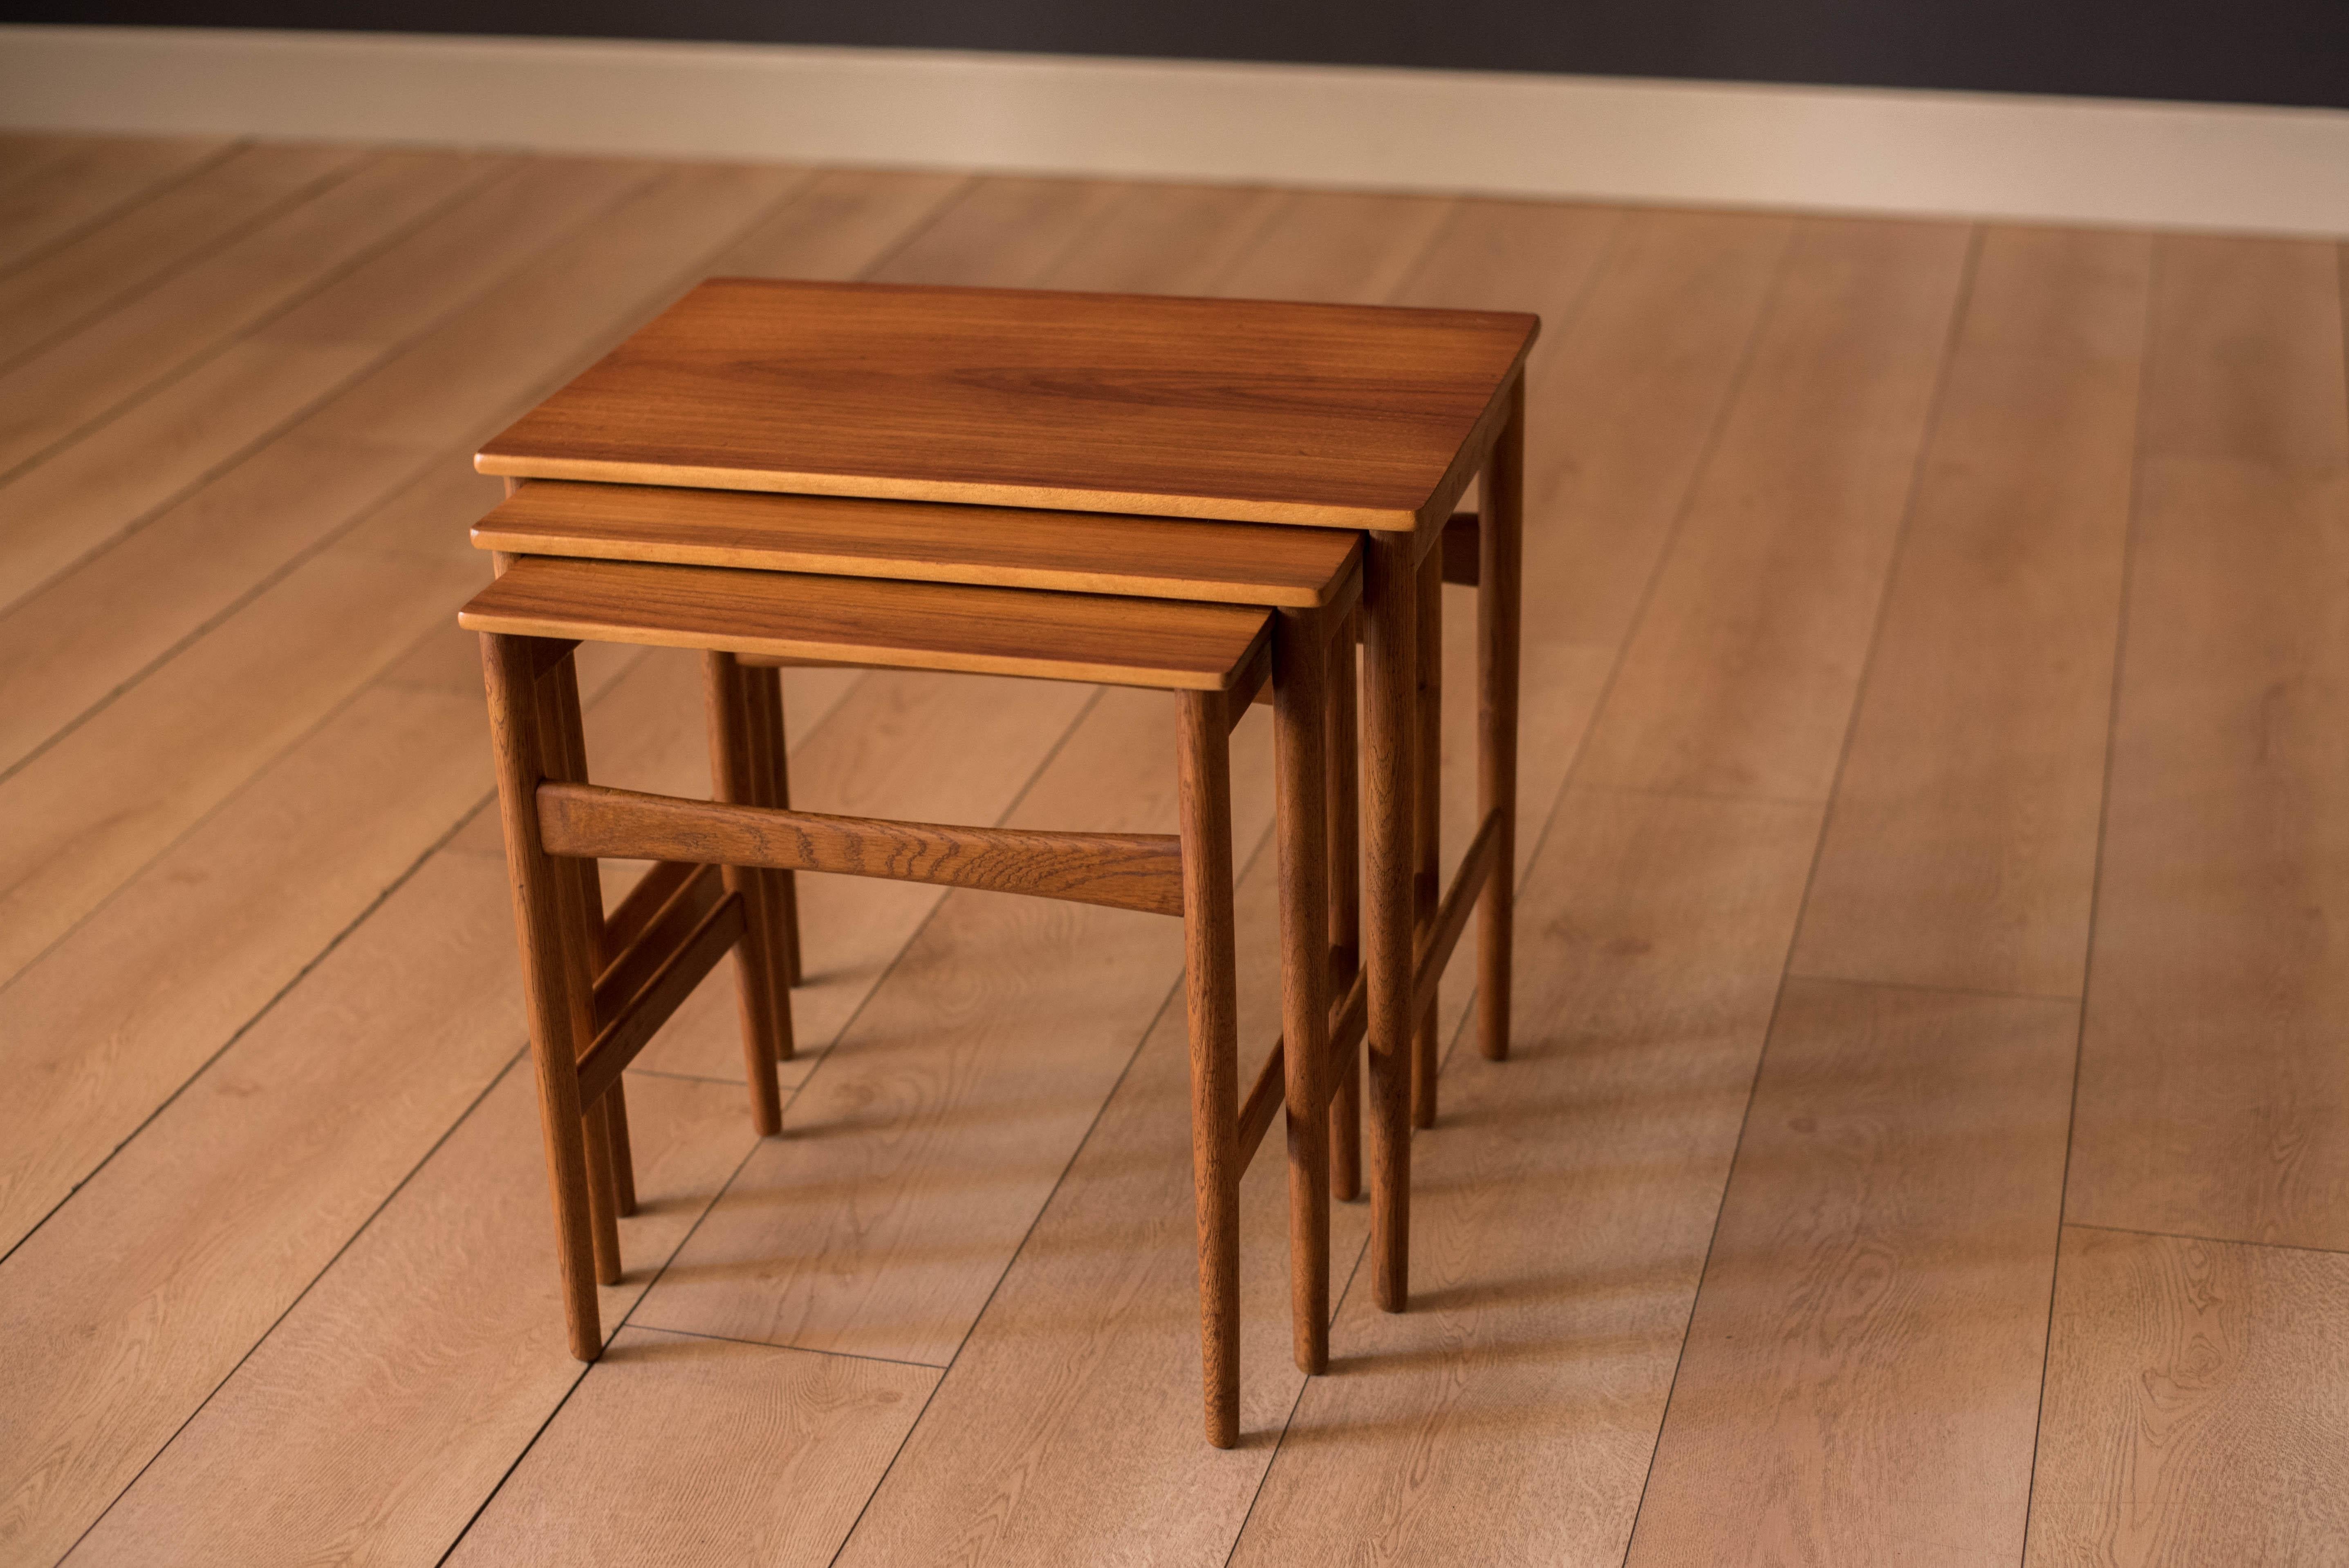 Mid-Century Modern set of three nesting tables in teak designed by Hans Wegner for Andreas Tuck, Denmark circa 1960's. This set features contrasting beech edge banding and supporting oak legs. Includes three separate end tables in various sizes that